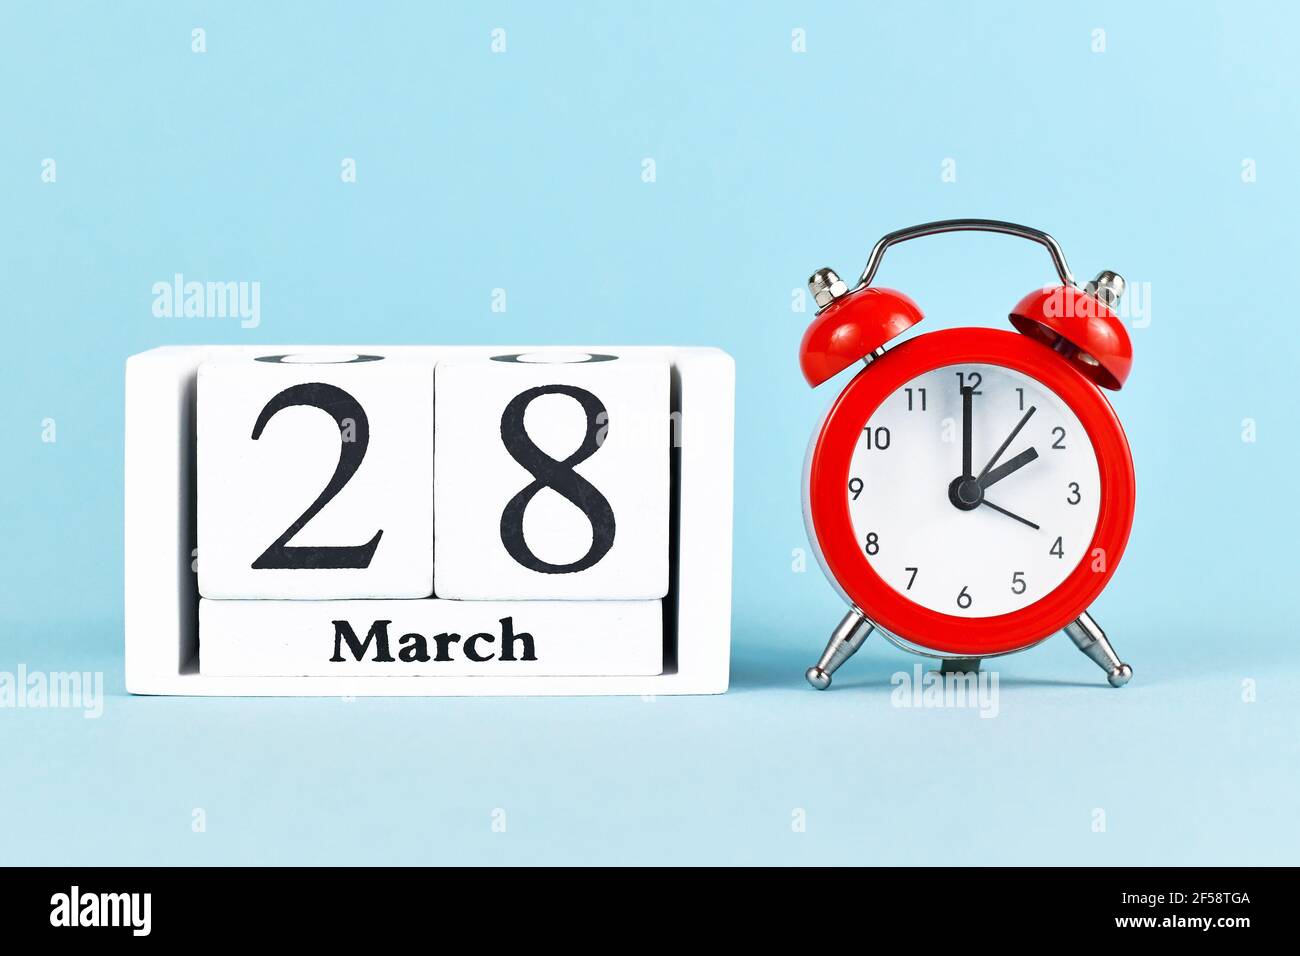 Concept for time change for daylight saving summer time in Europe on March 28th with red alarm clock and calendar on blue Stock Photo